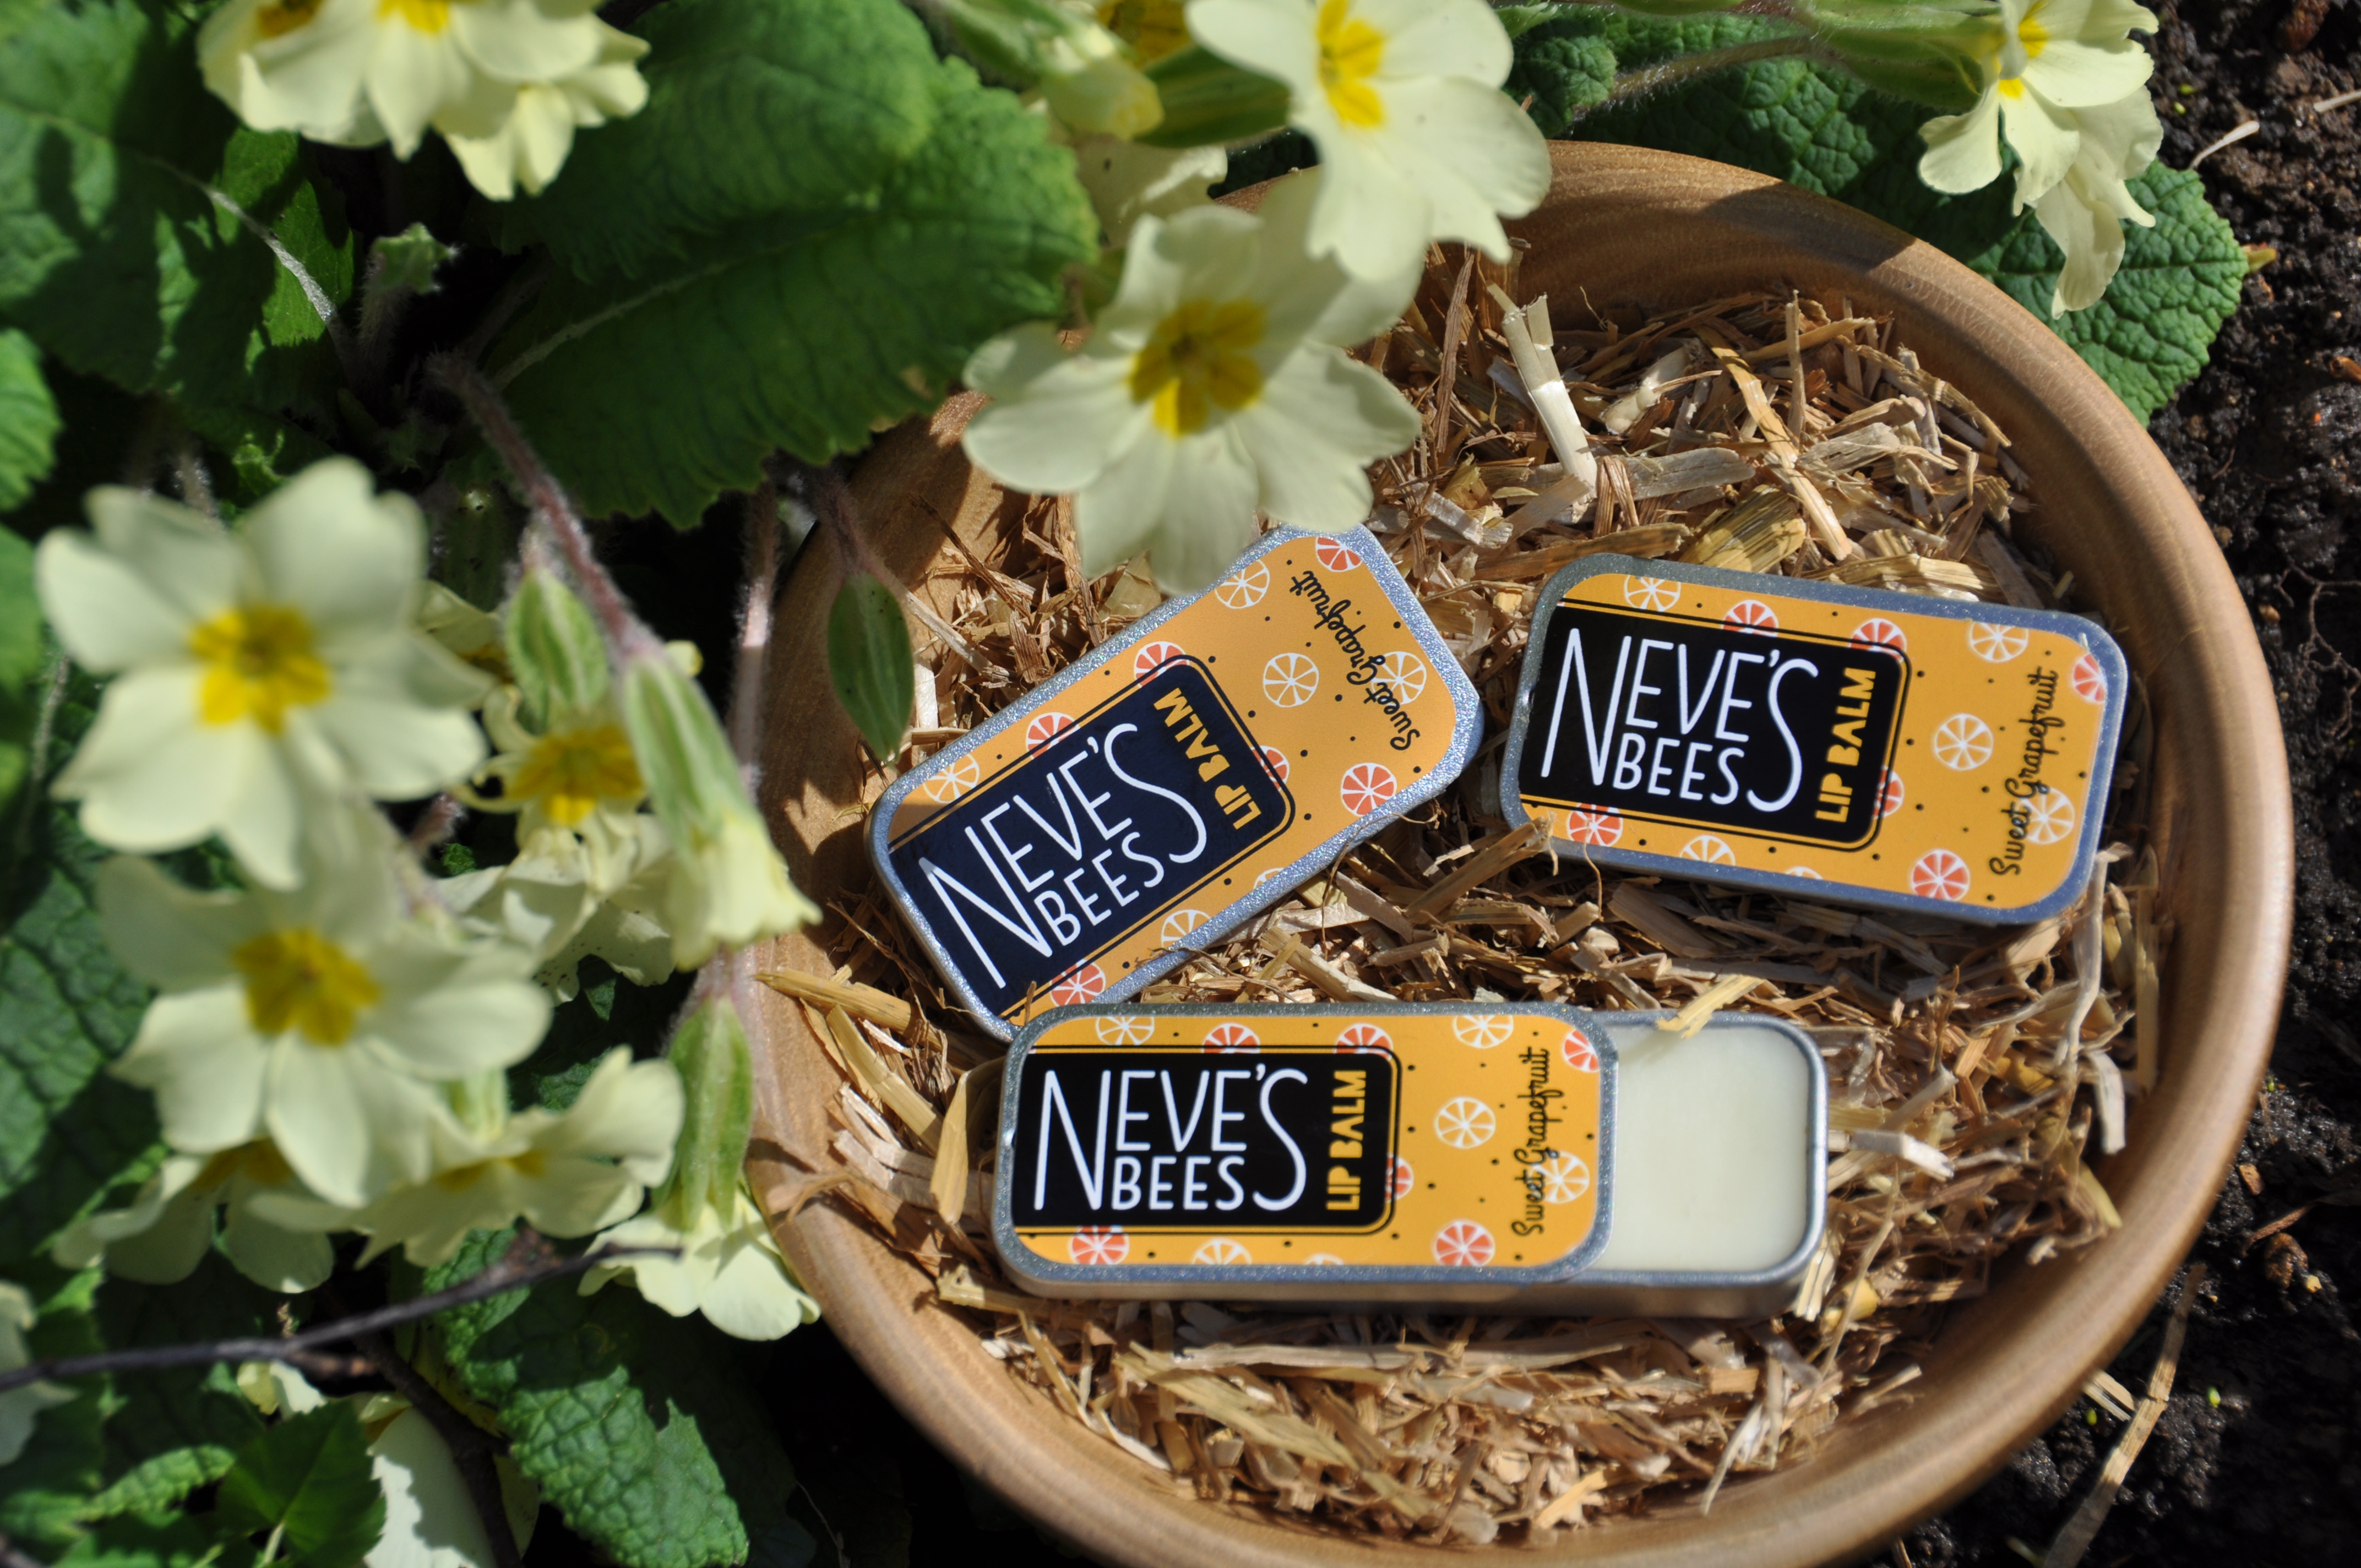 Oxfordshire’s Neve’s Bees buzzing after launching new lip balm and hand salve ranges